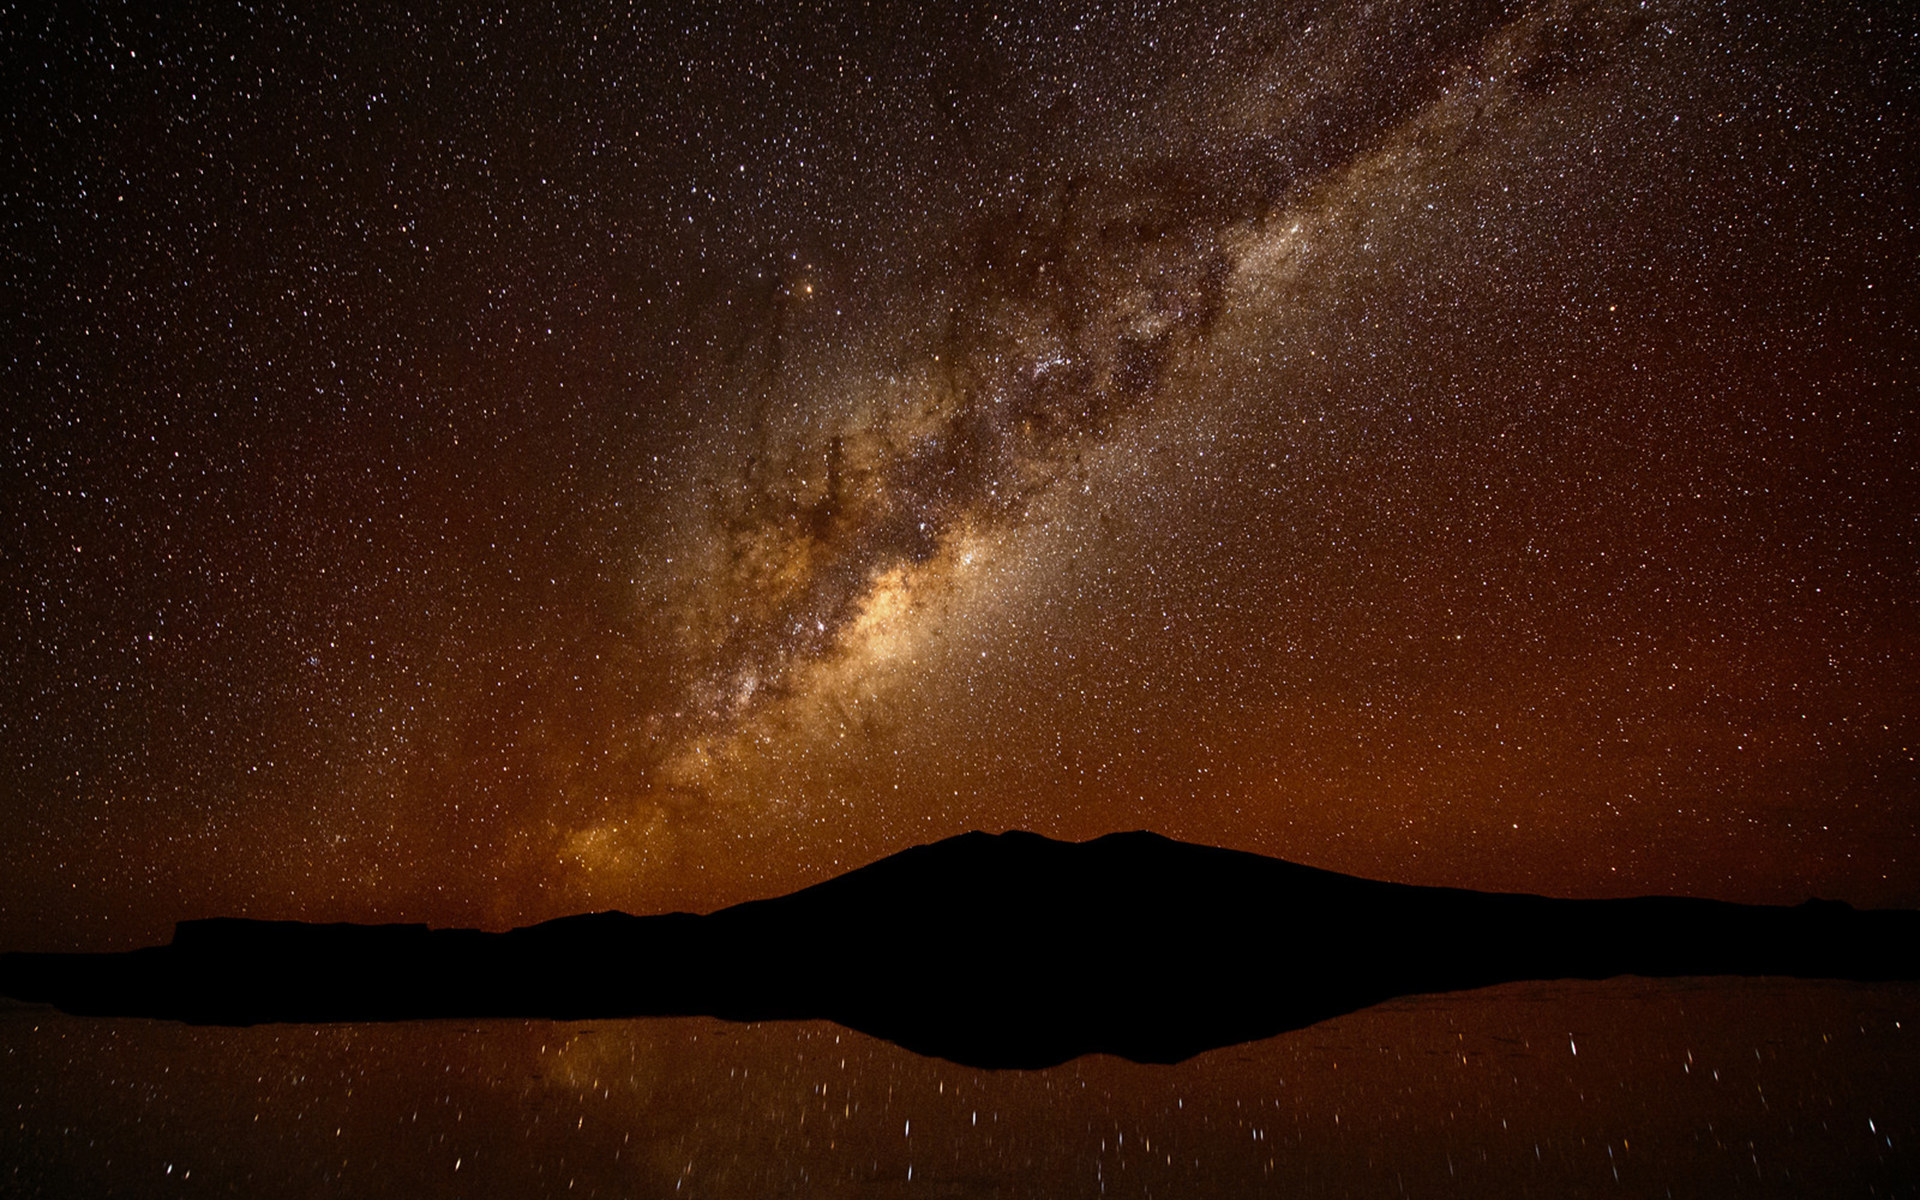 The Bolivian Milky Way – Coipasa Salt Flats, Bolivia by Colby Brown